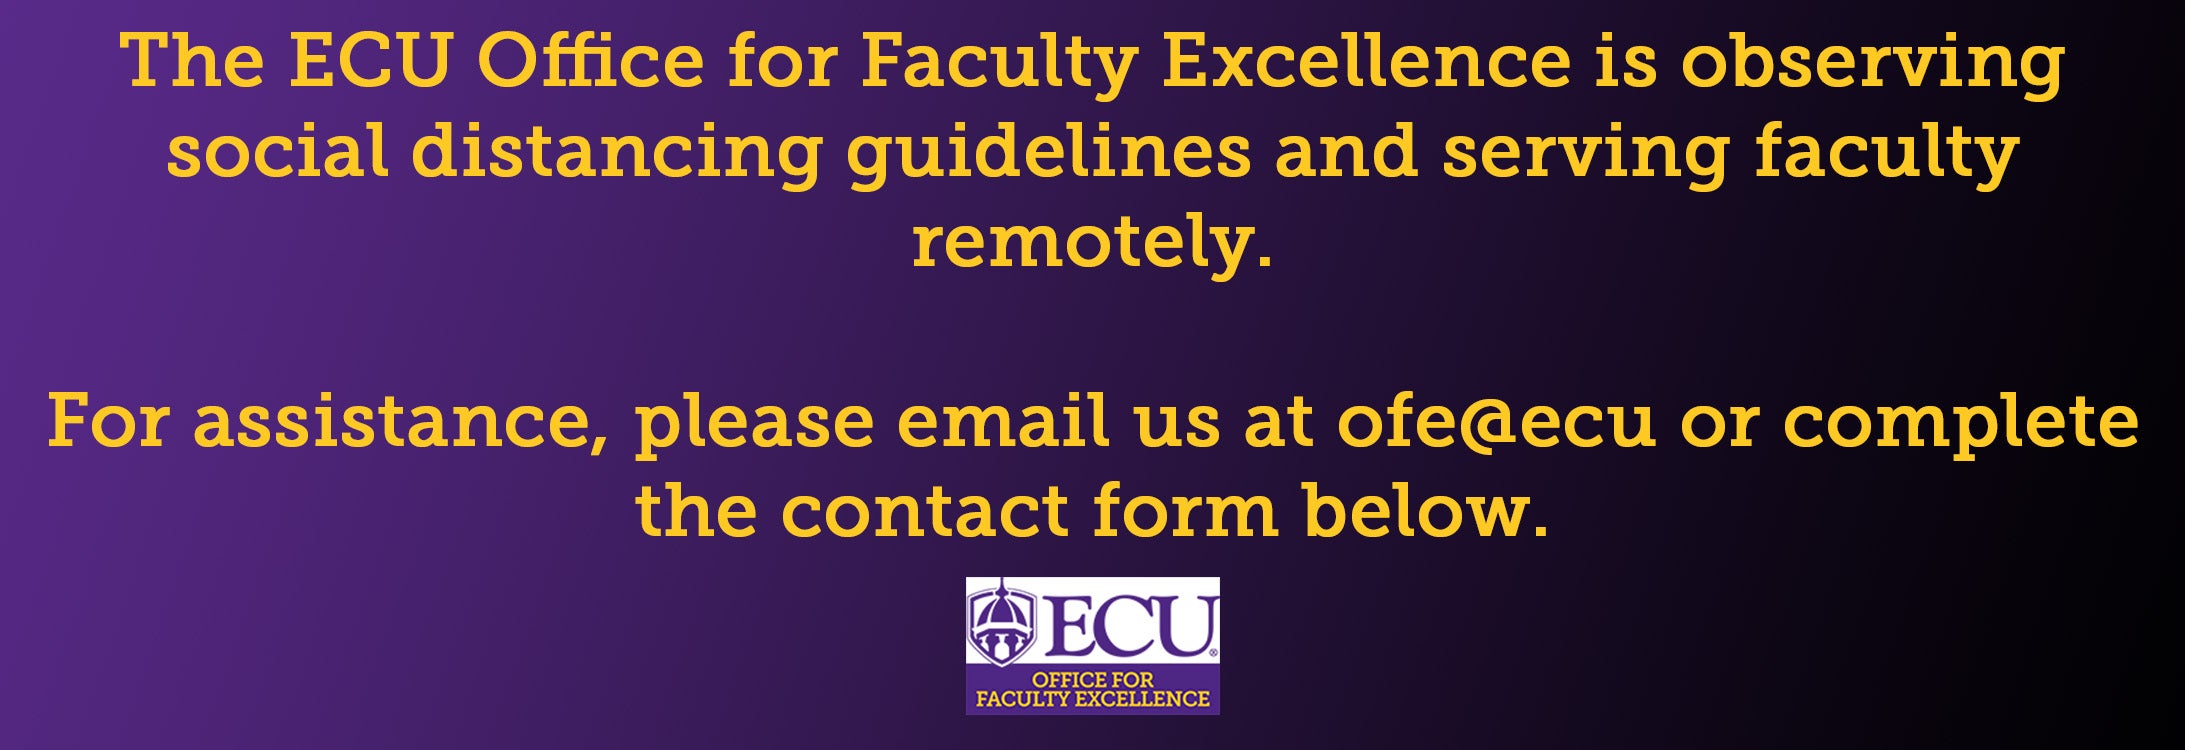 The ECU Office for Faculty Excellence is observing social distancing guidelines and serving faculty remotely. Please email us at ofe@ecu.edu or complete the form below for assistance.